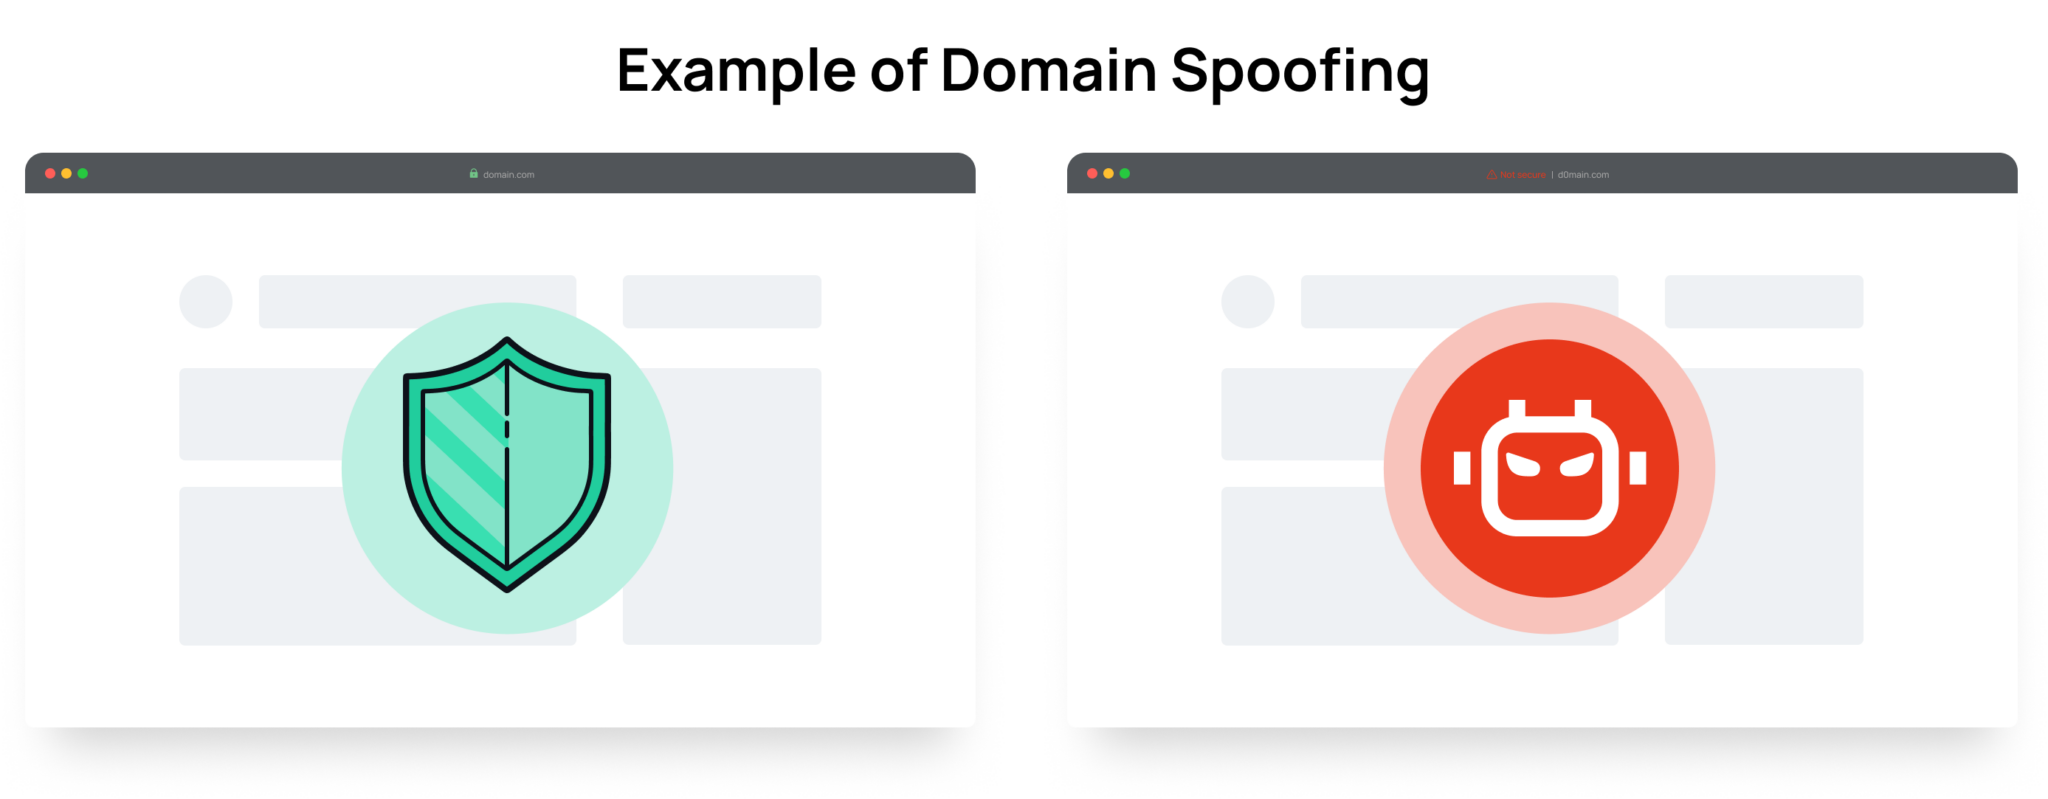 Domain Spoofing example